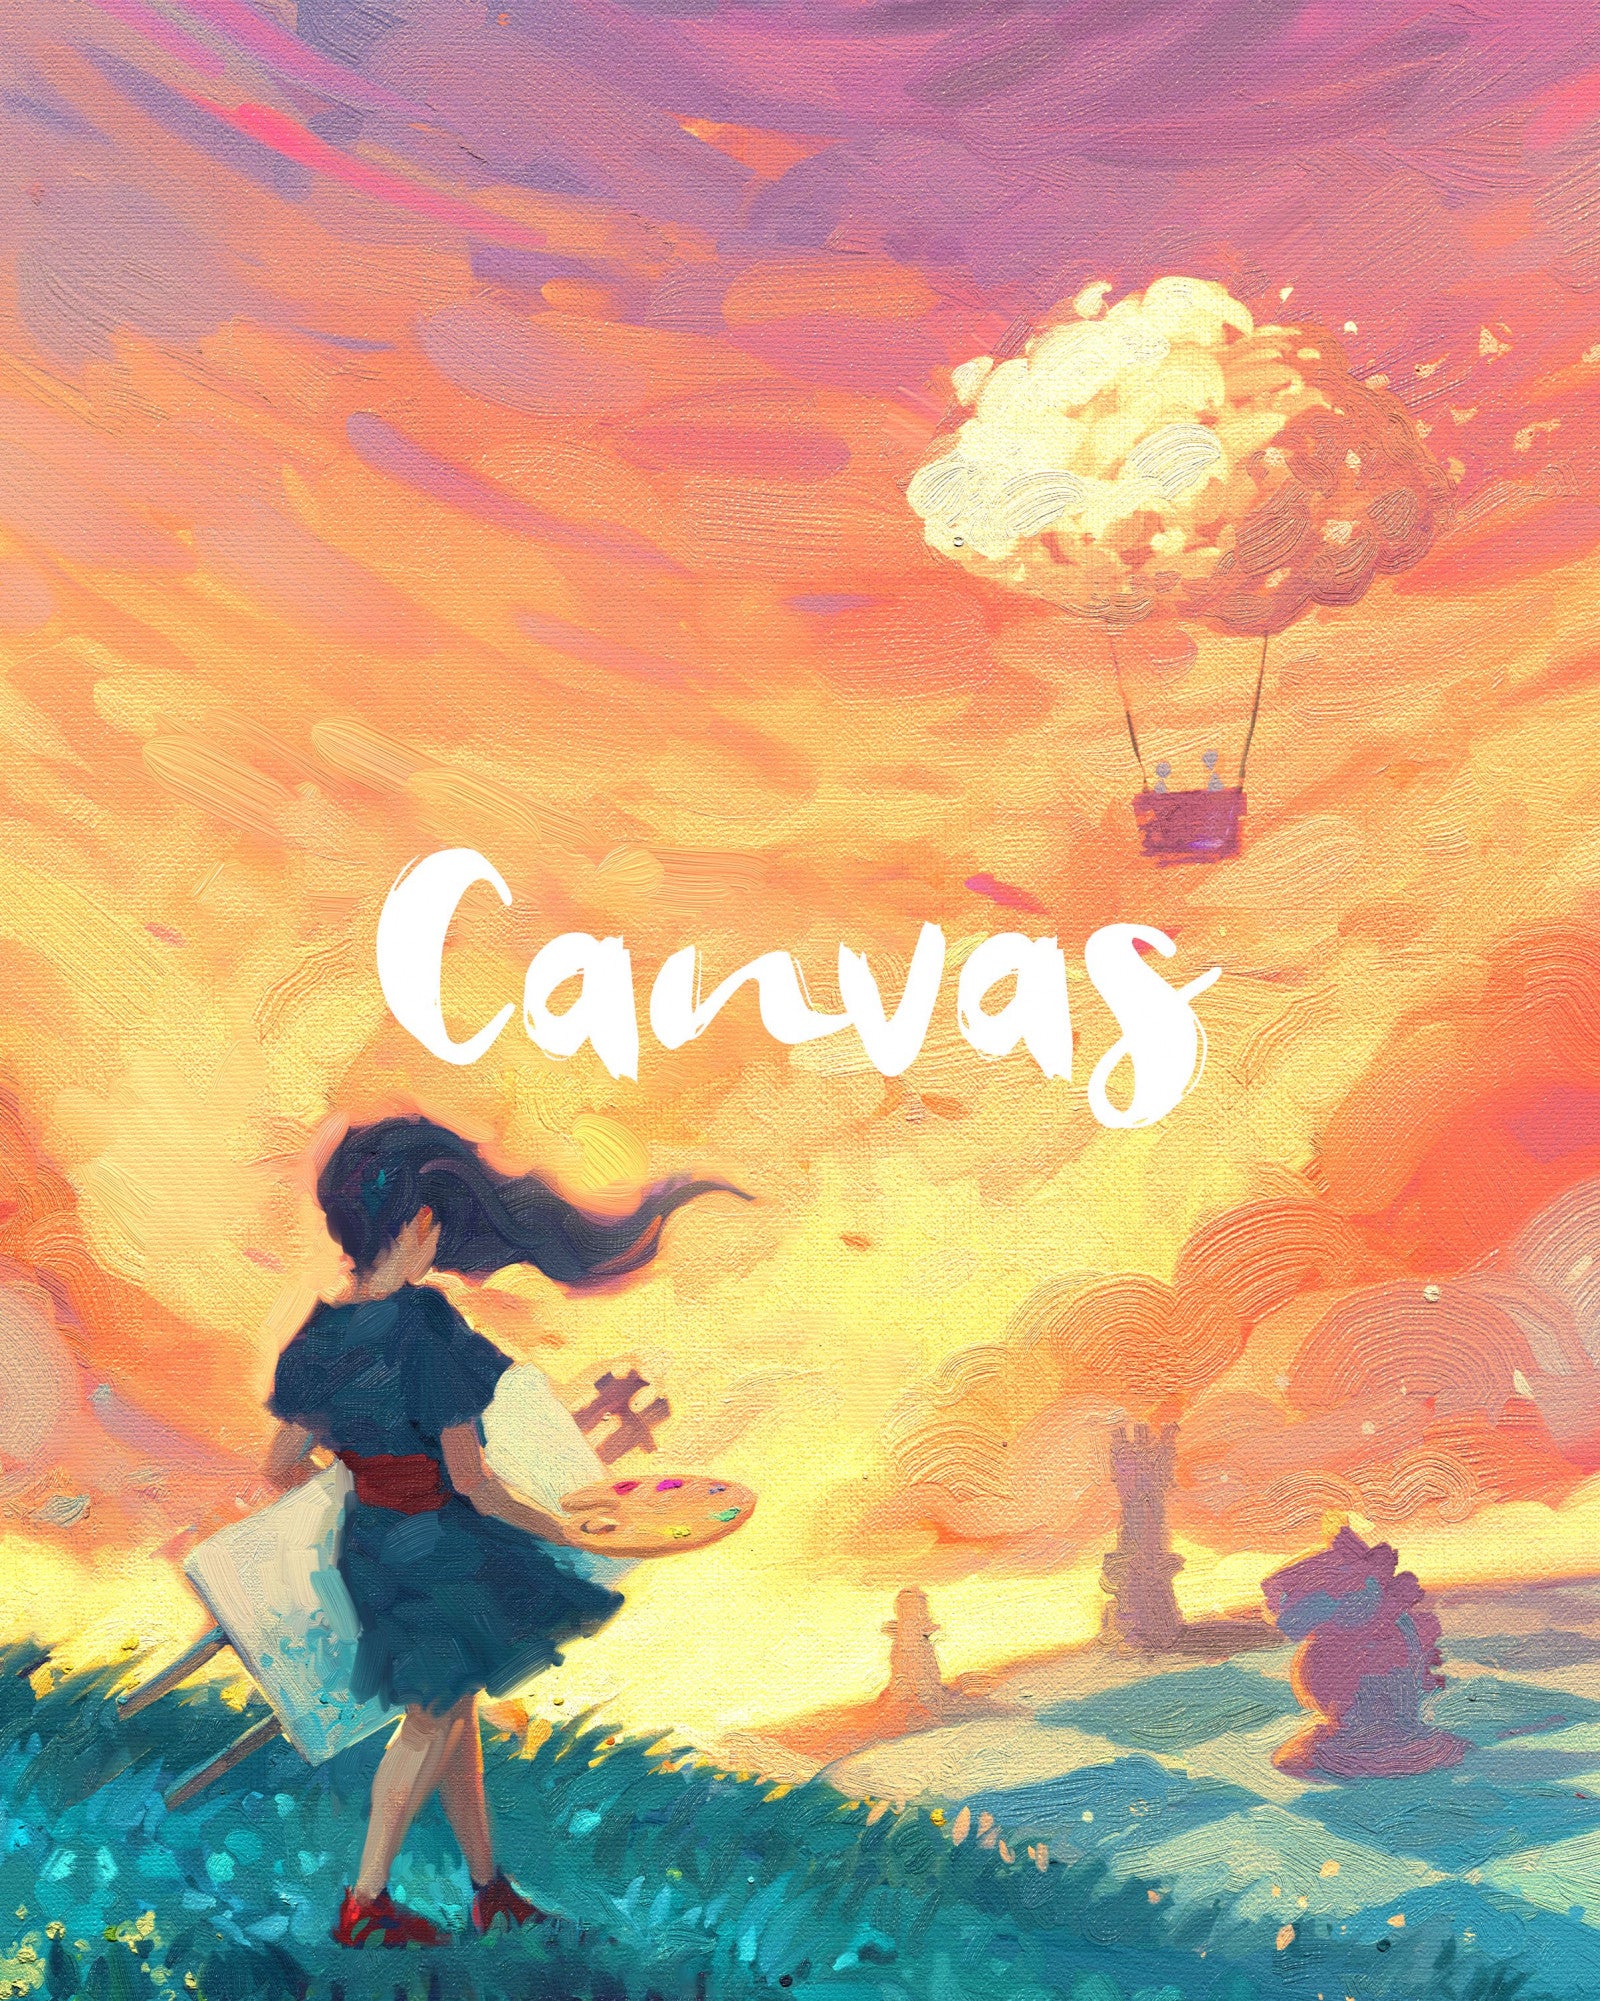 Canvas board game cover art